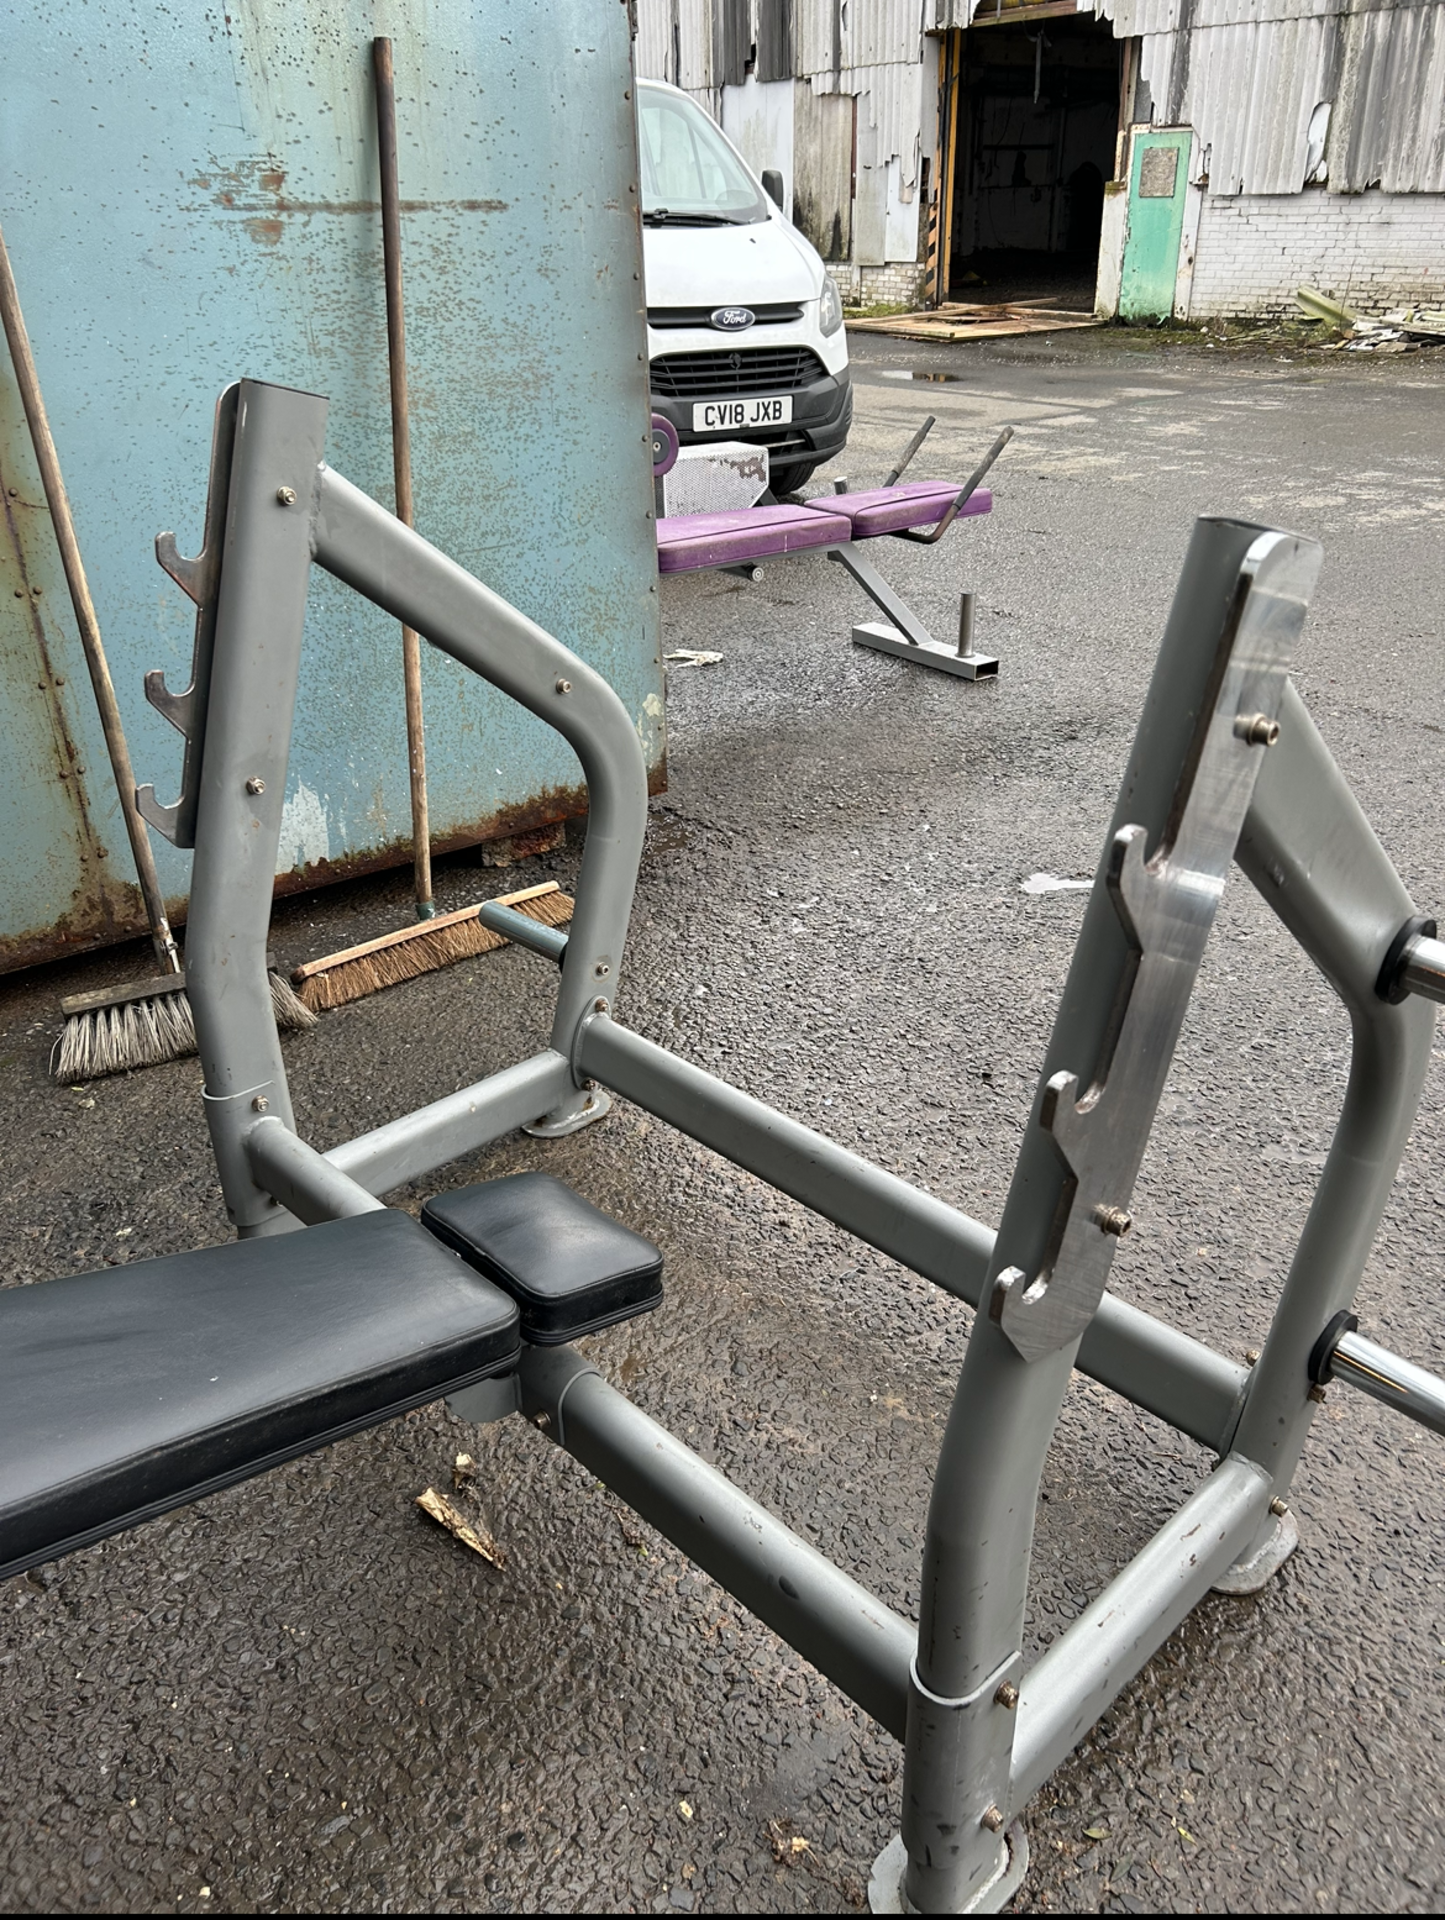 Commercial Olympic decline weight bench press unit. Average condition a few rusty parts shown in the - Image 3 of 4